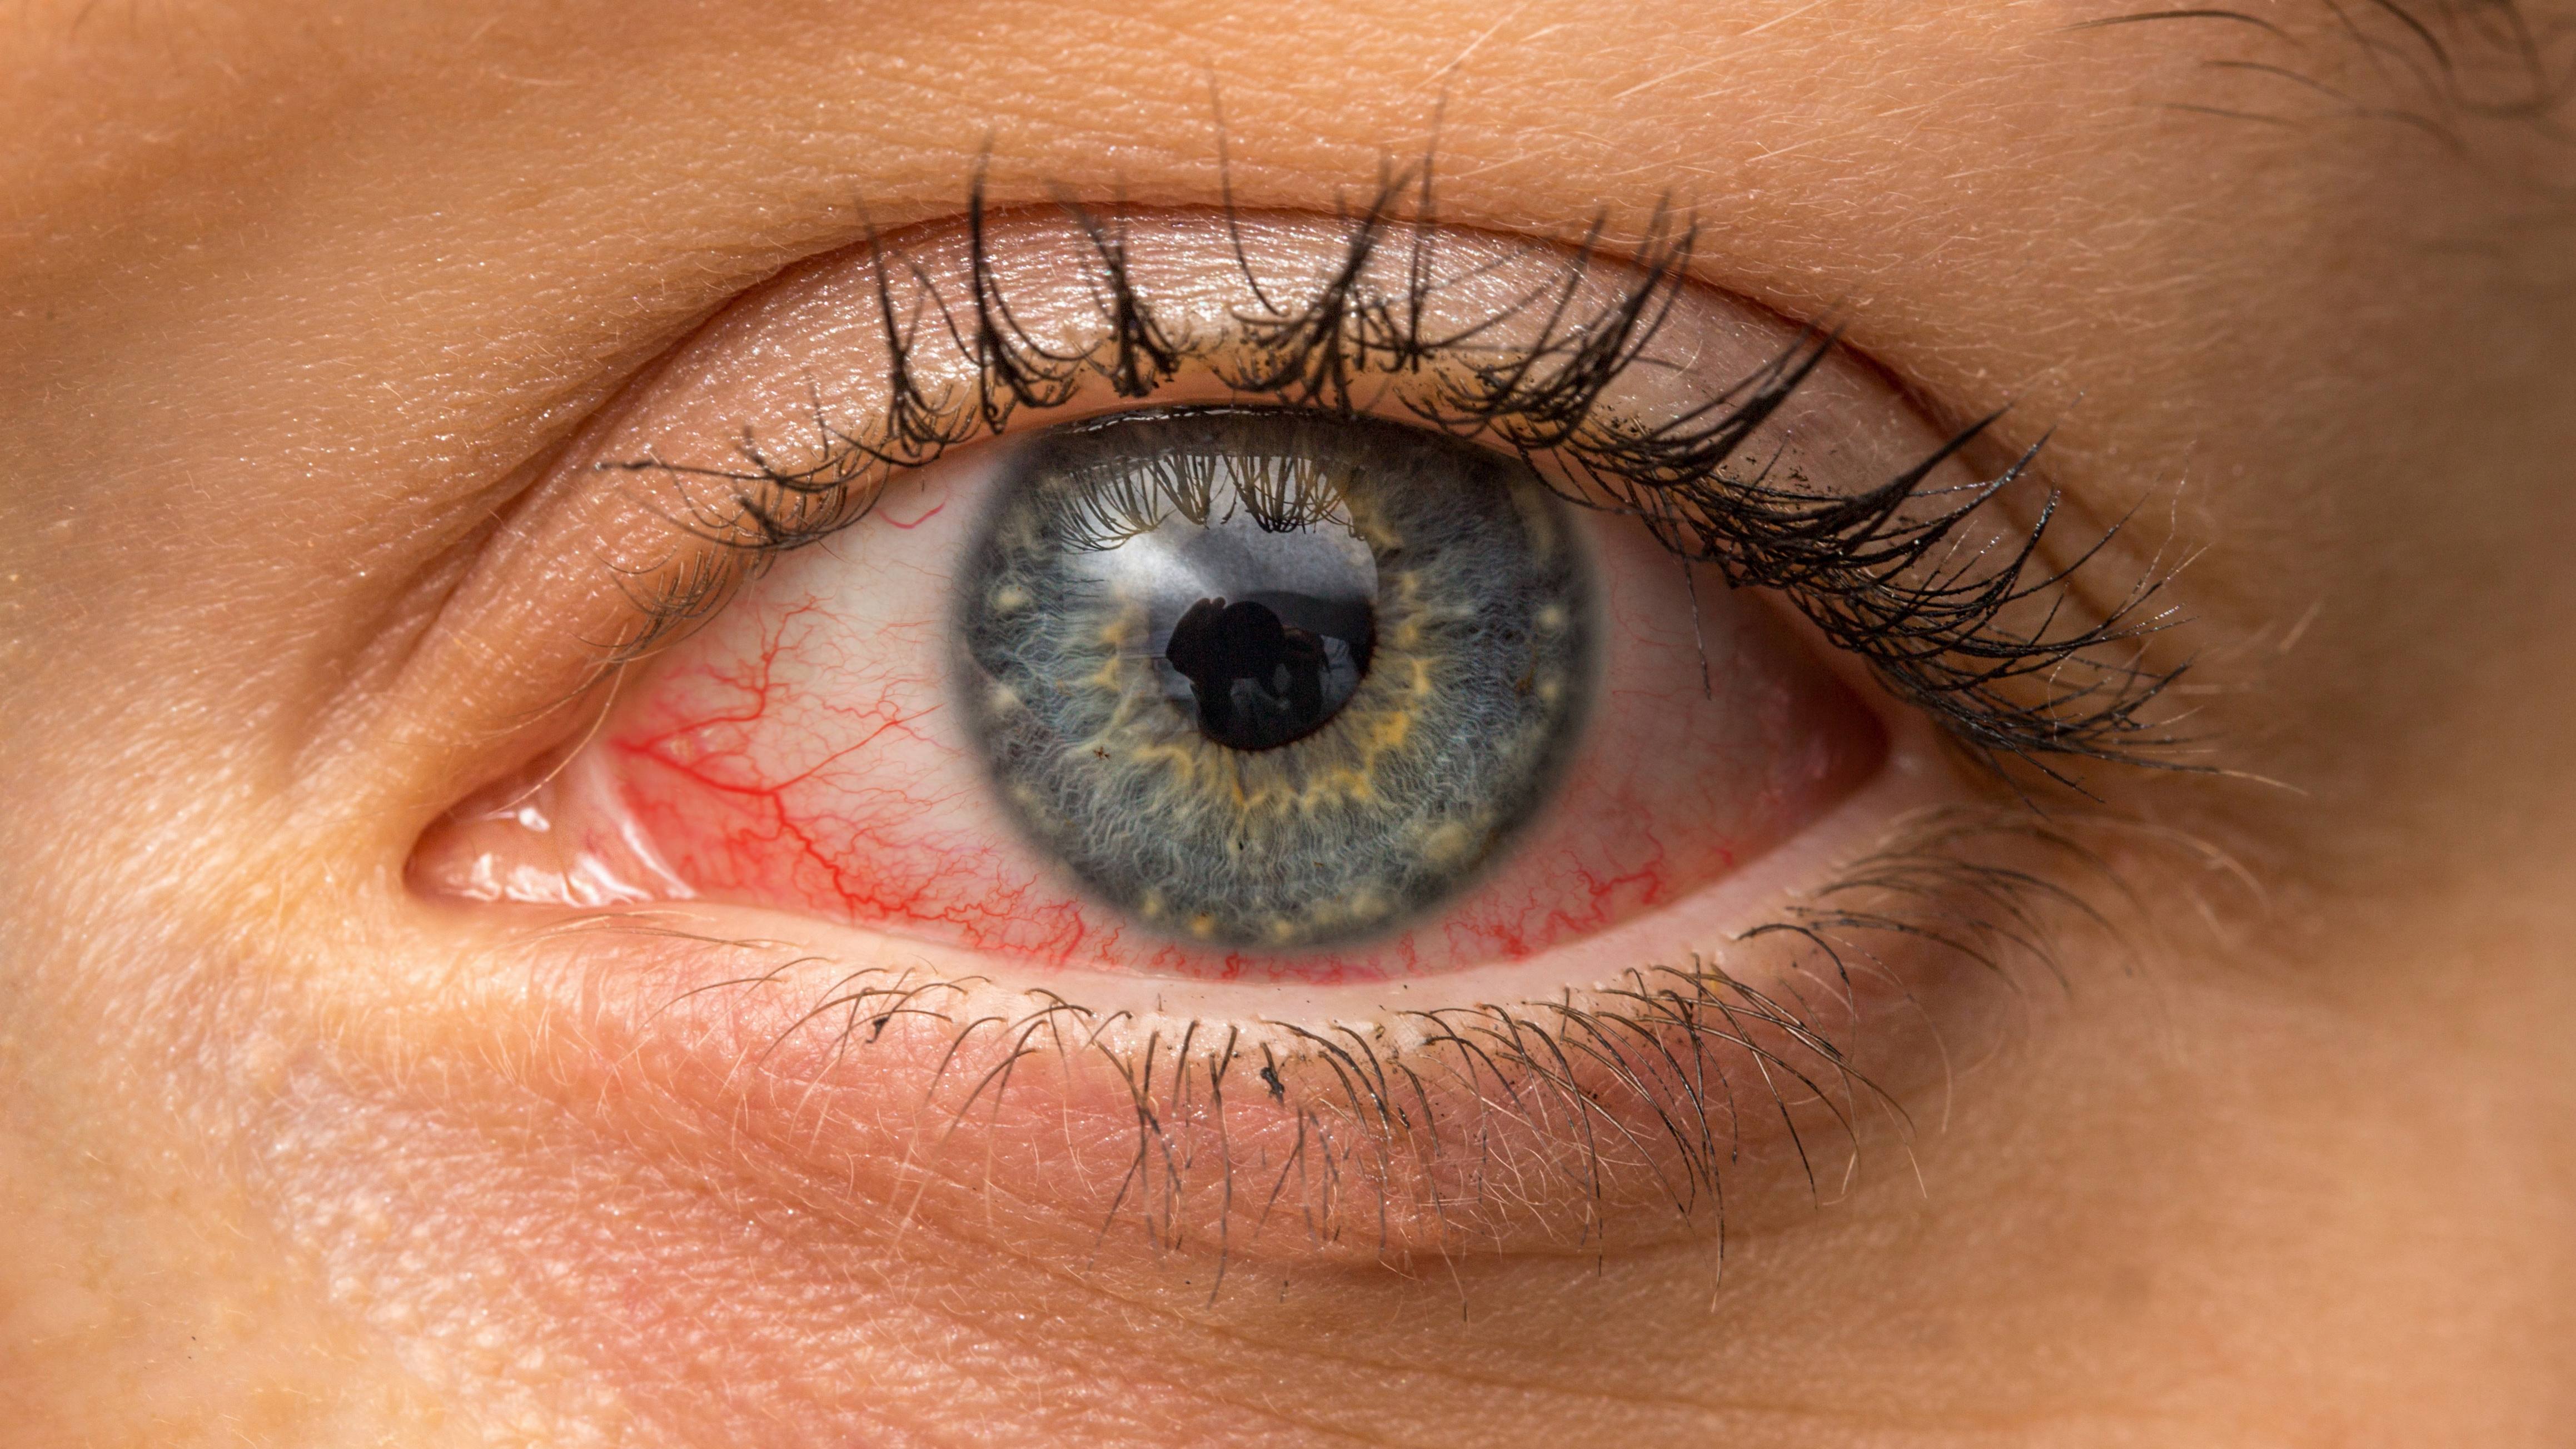 Home Remedies: Coping with conjunctivitis - Mayo Clinic News Network